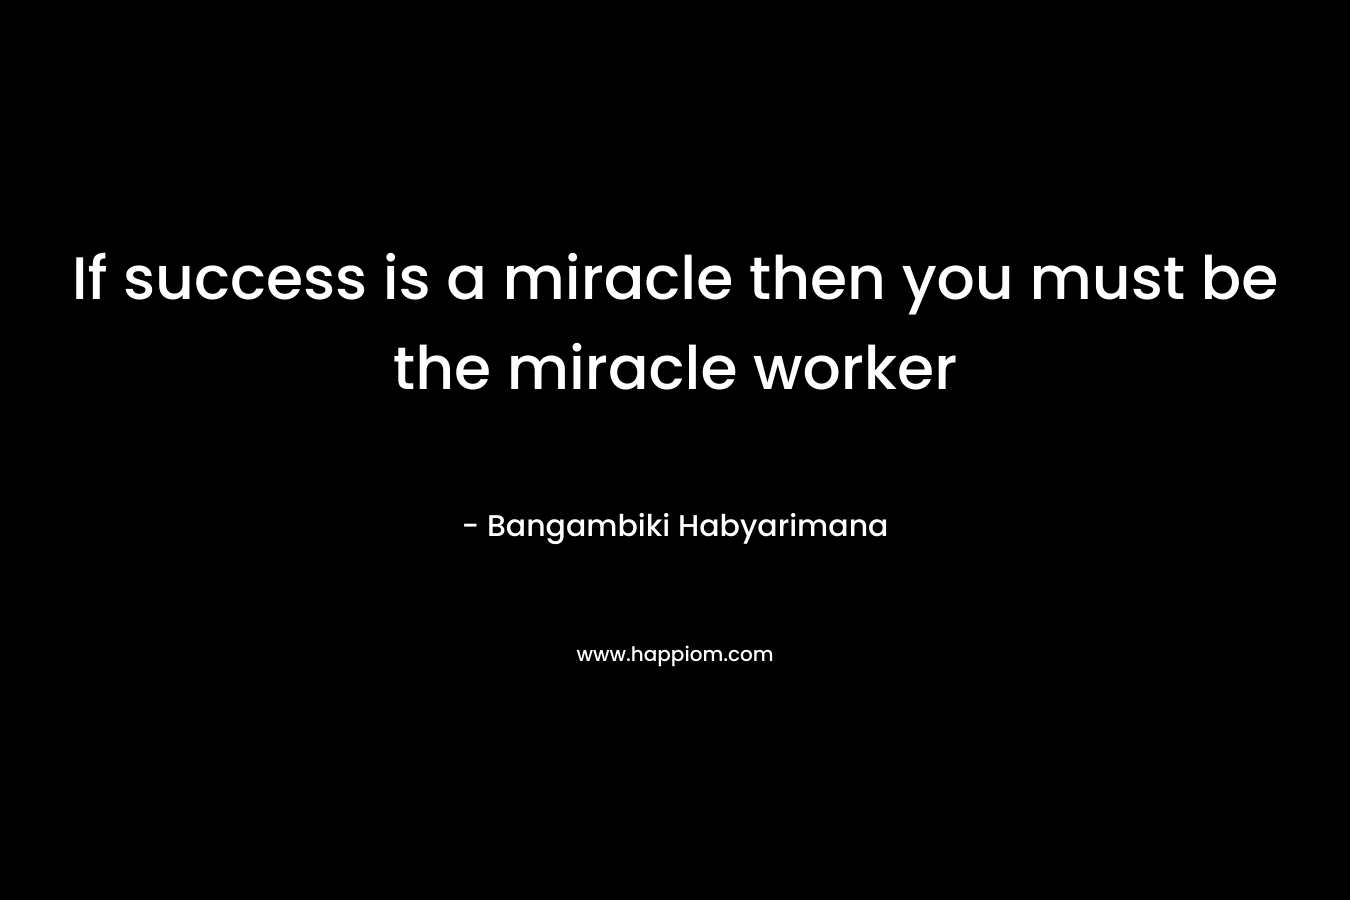 If success is a miracle then you must be the miracle worker